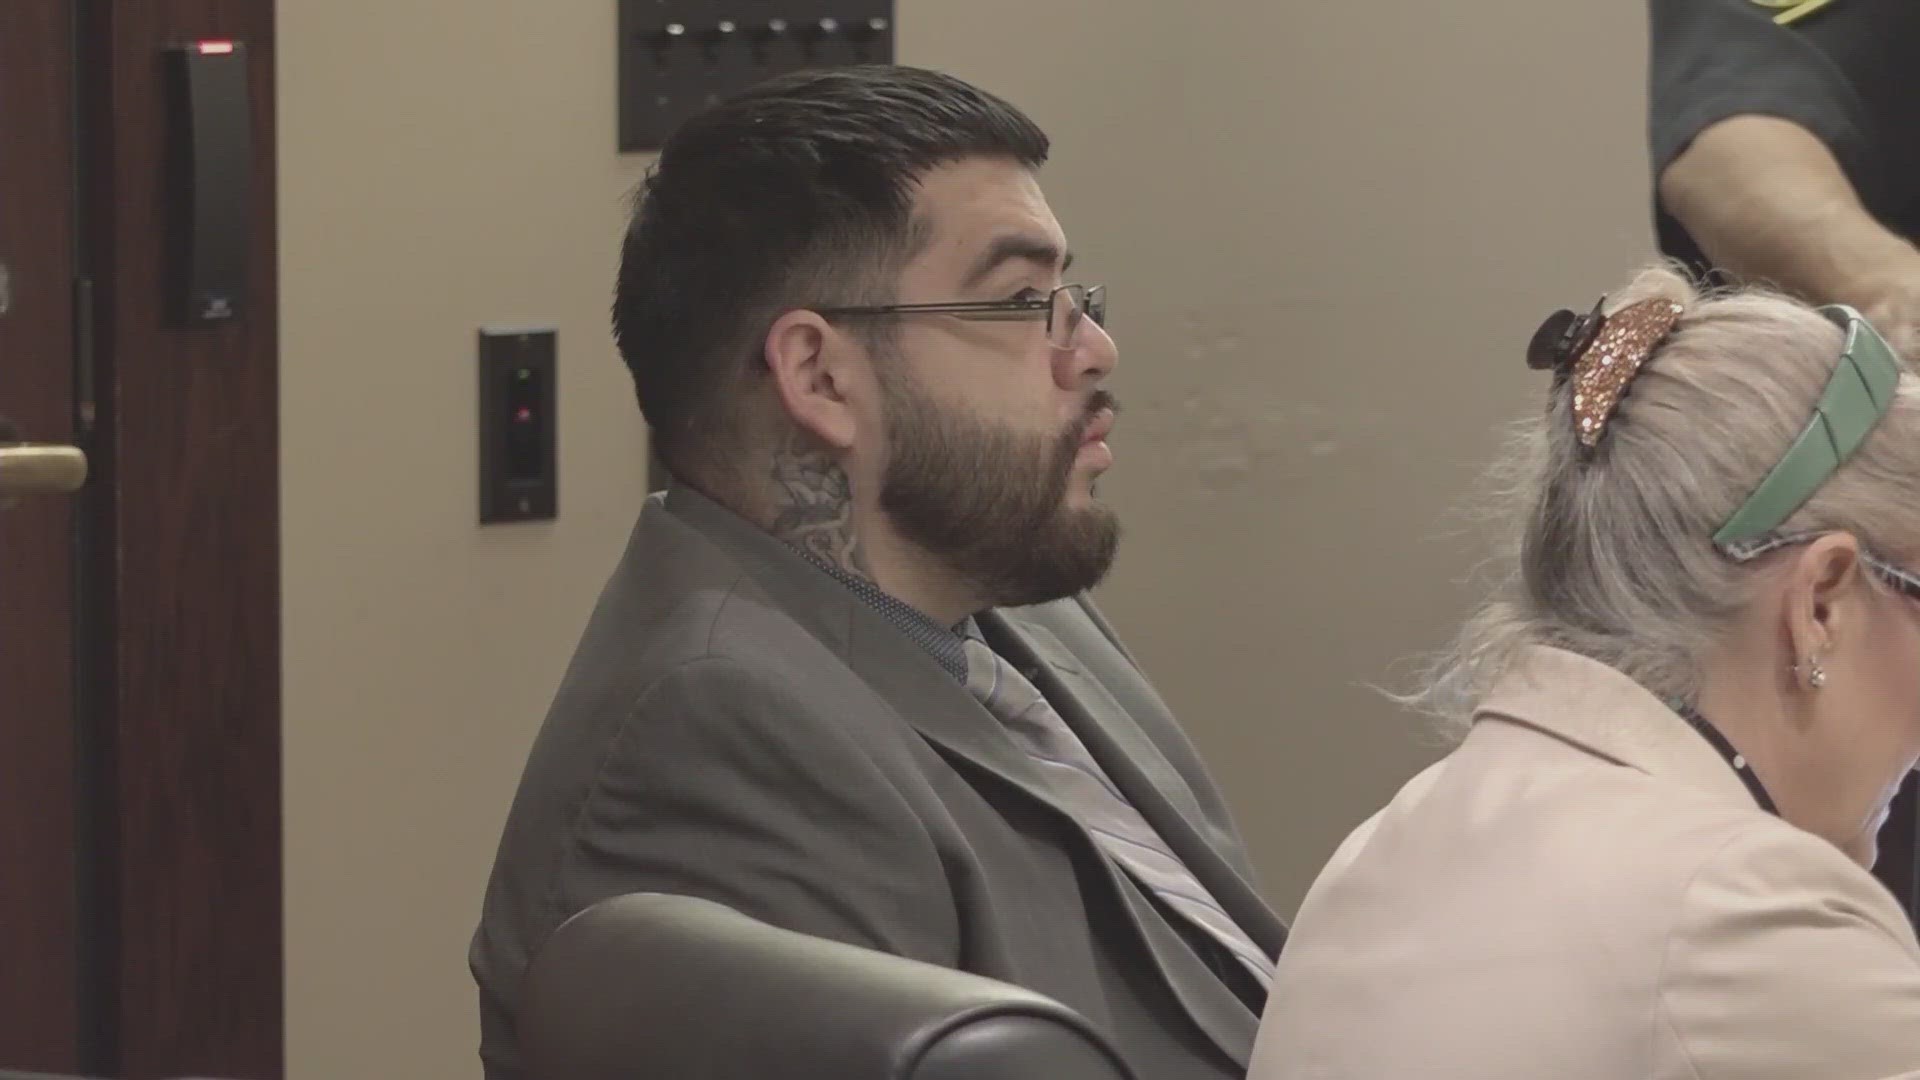 Jury sentenced Jose Ruiz to life in prison after he was convicted on seven counts of injury to a child and aggravated assault with a deadly weapon.